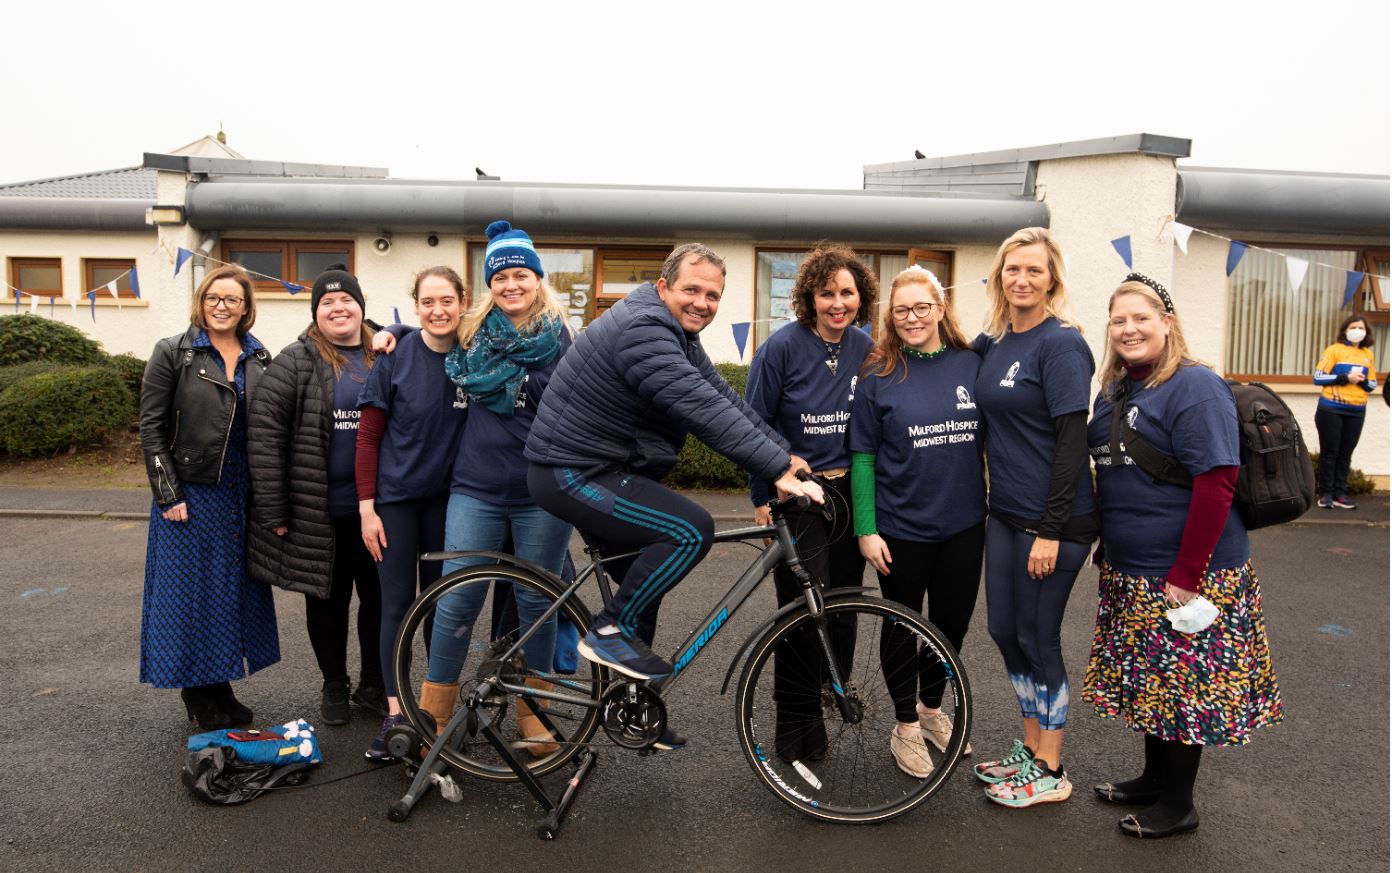 Parteen National School Fundraiser: Pictured at Parteen National School is Lauren Francis (organiser), Fidelma Coughlan, Lisa Quilty, Louise Whelan, Maighread Broggy (team) and assisted by principal, Ms. Smyth and Mary O Connor with Davy Fitzgerald